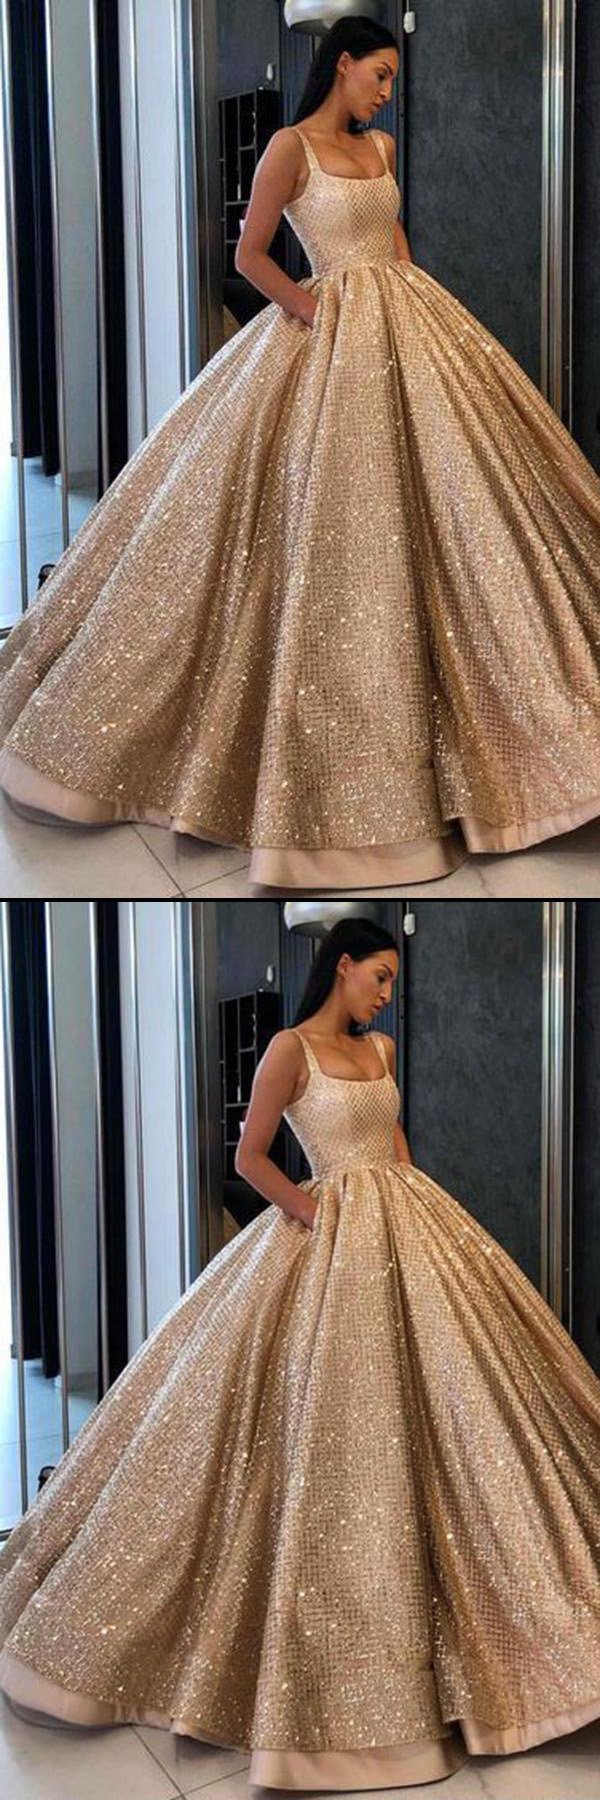 Ball Gown Prom Dress with Pockets Beads Sequins Evening Dresses Floor-Length Gold Quinceanera Dresses